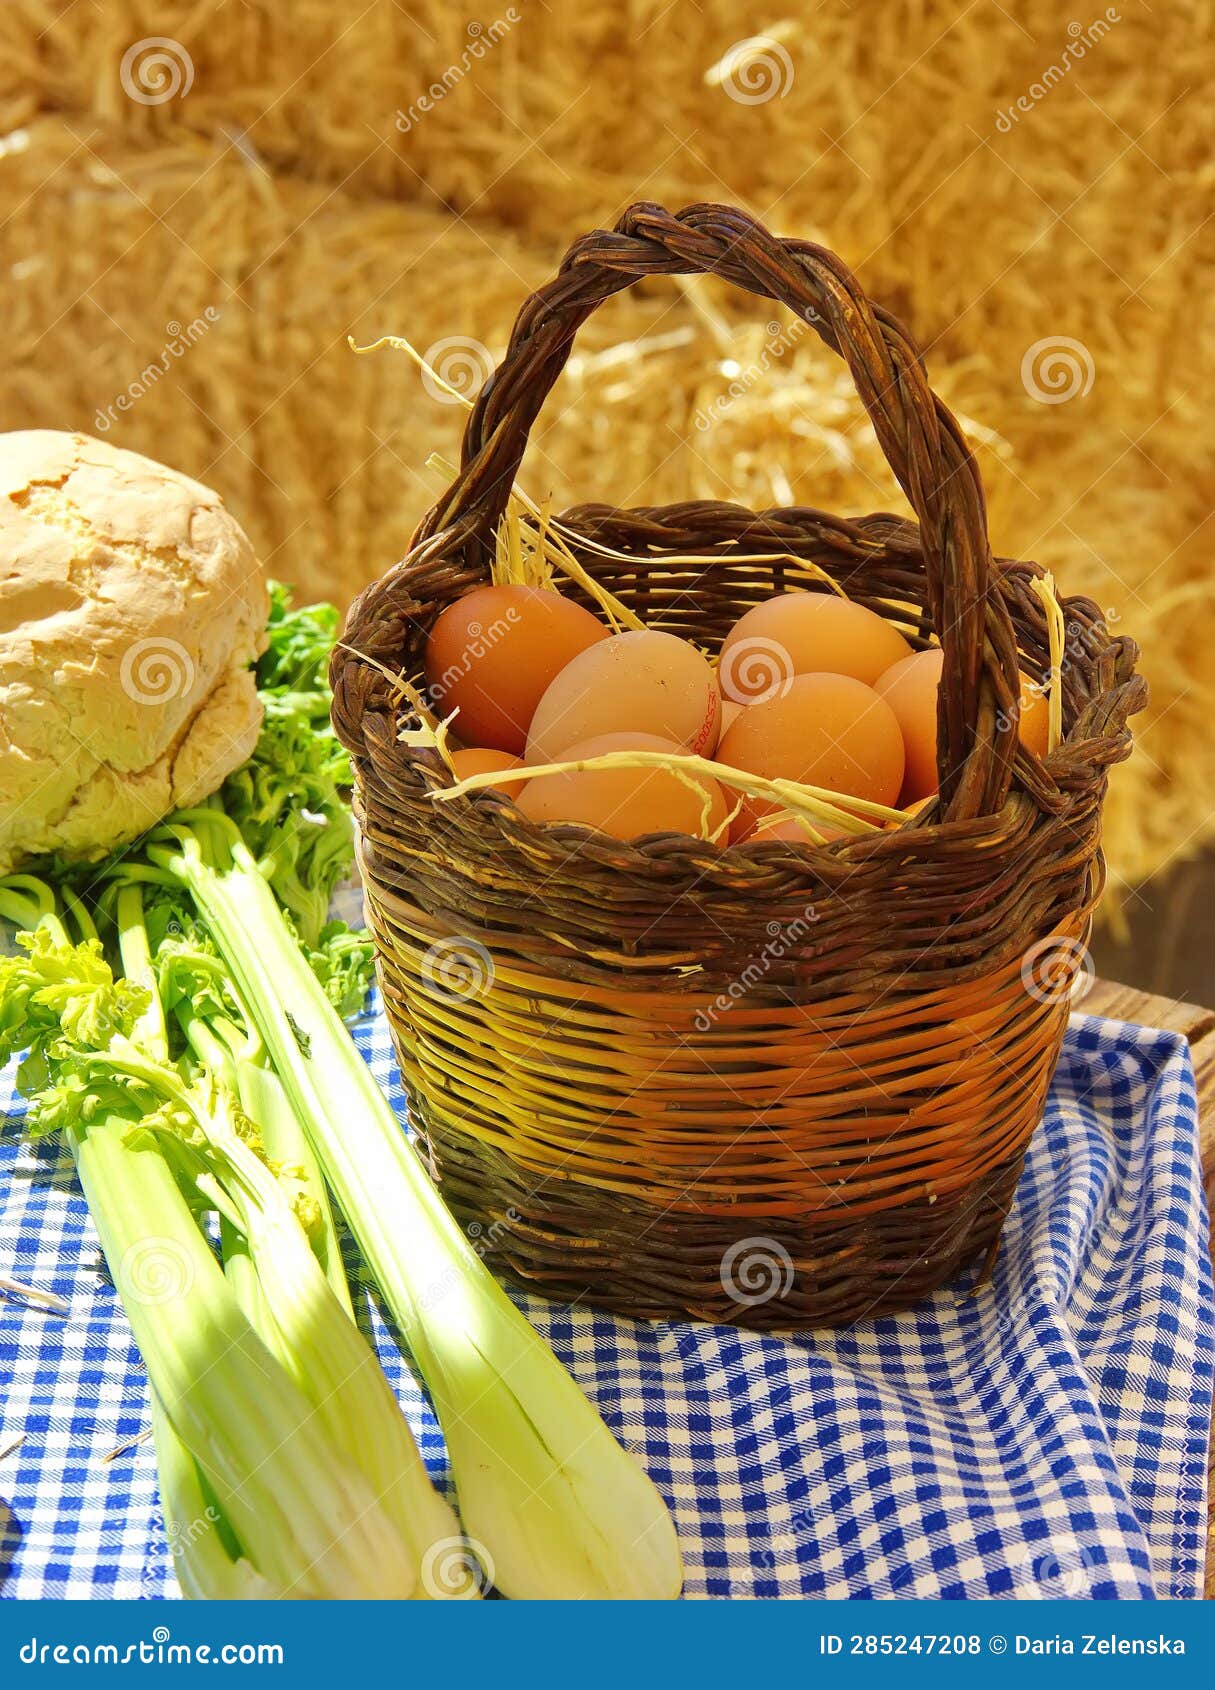 wicker basket made with homemade eggs on the table